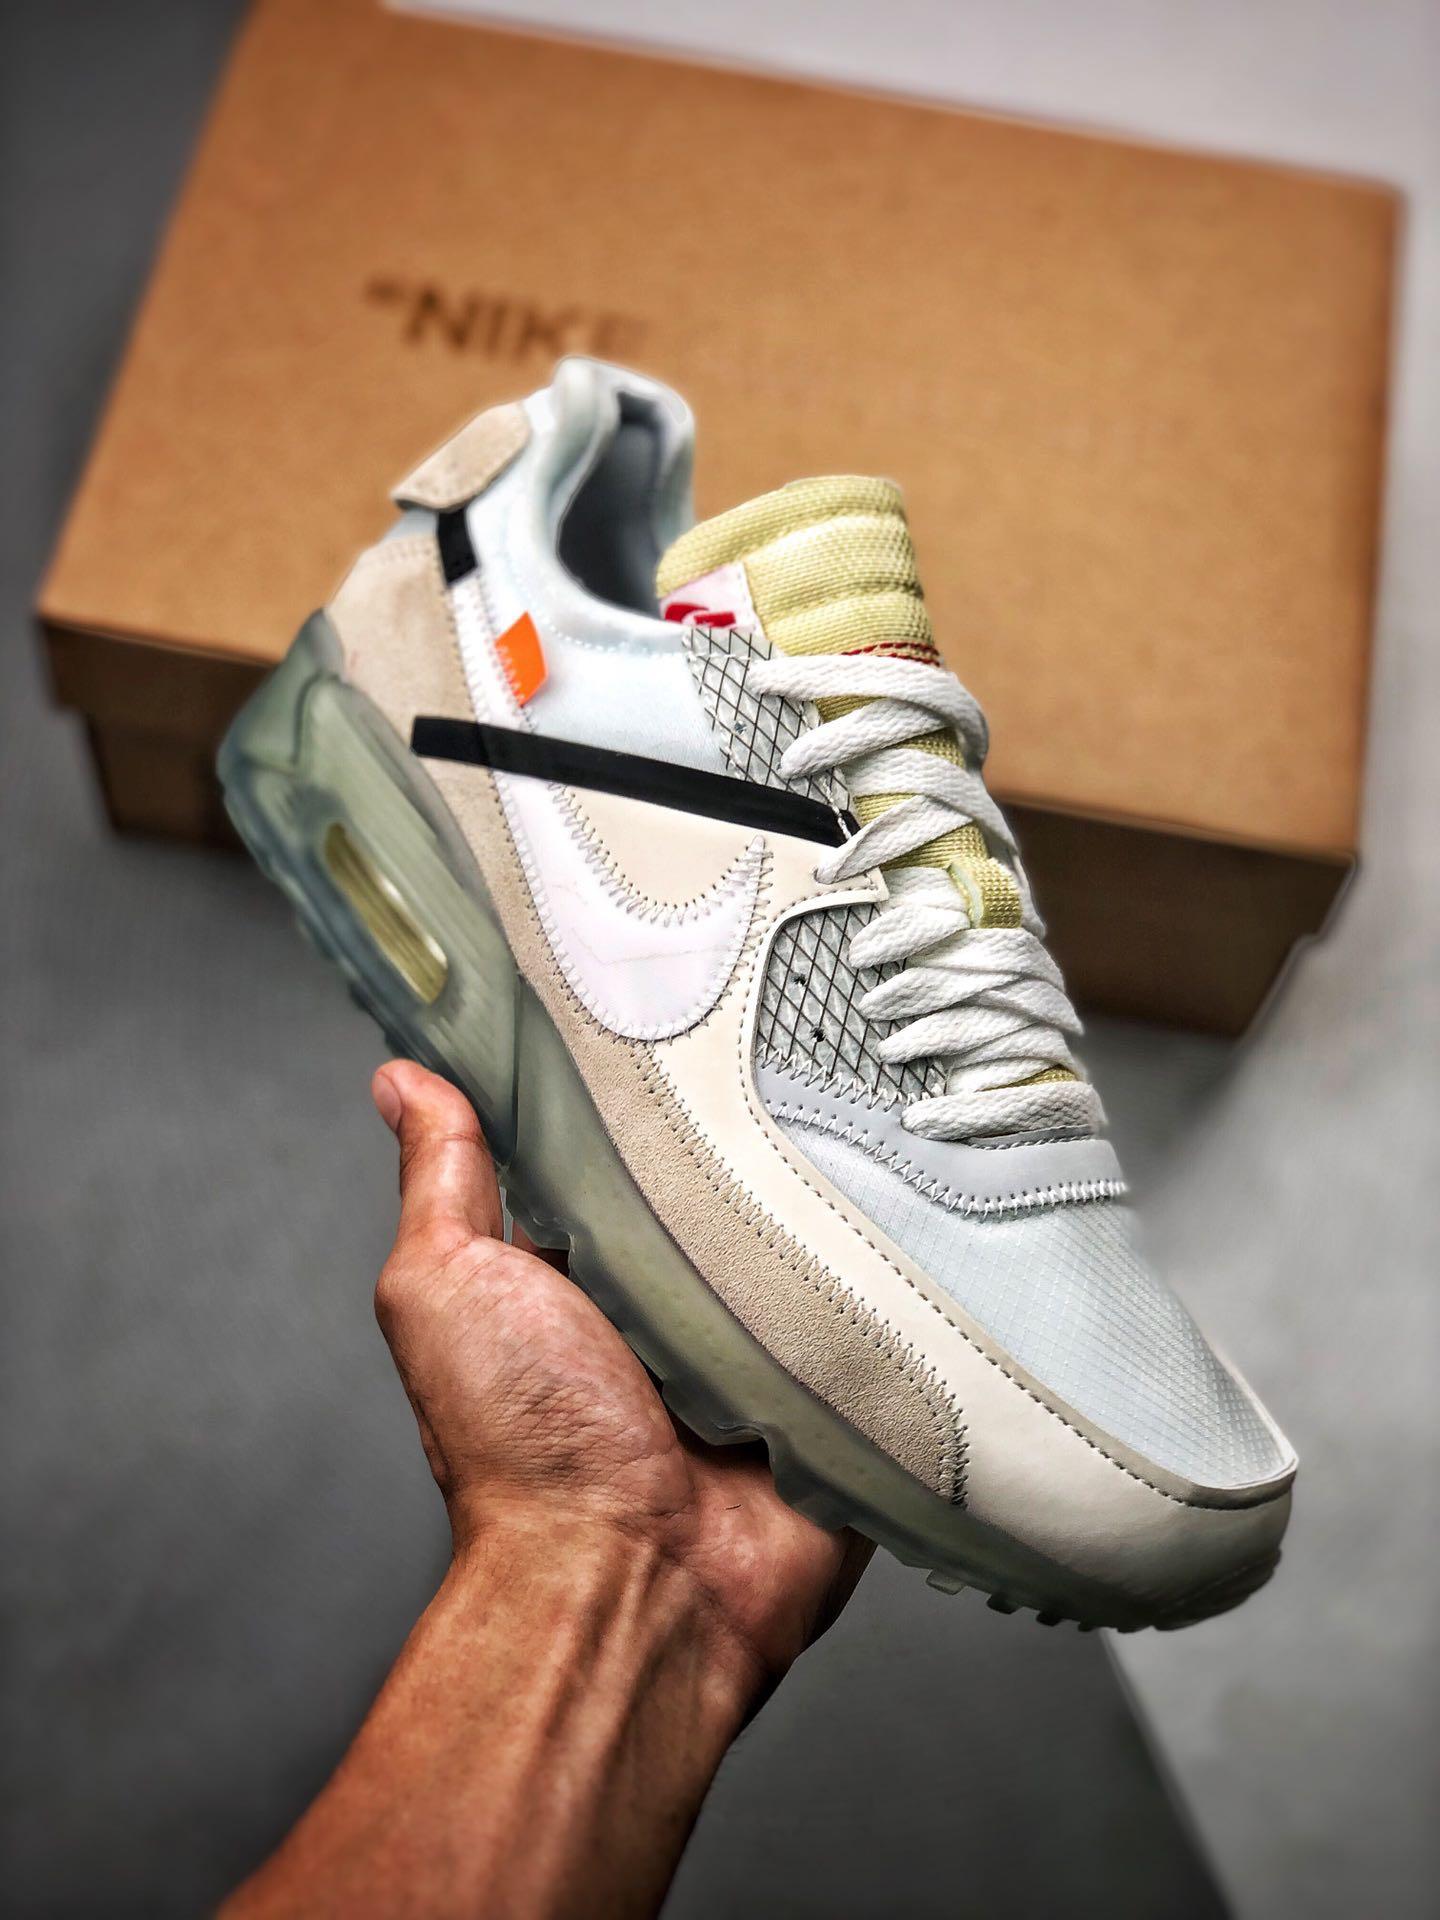 off white nike air max 90 ice